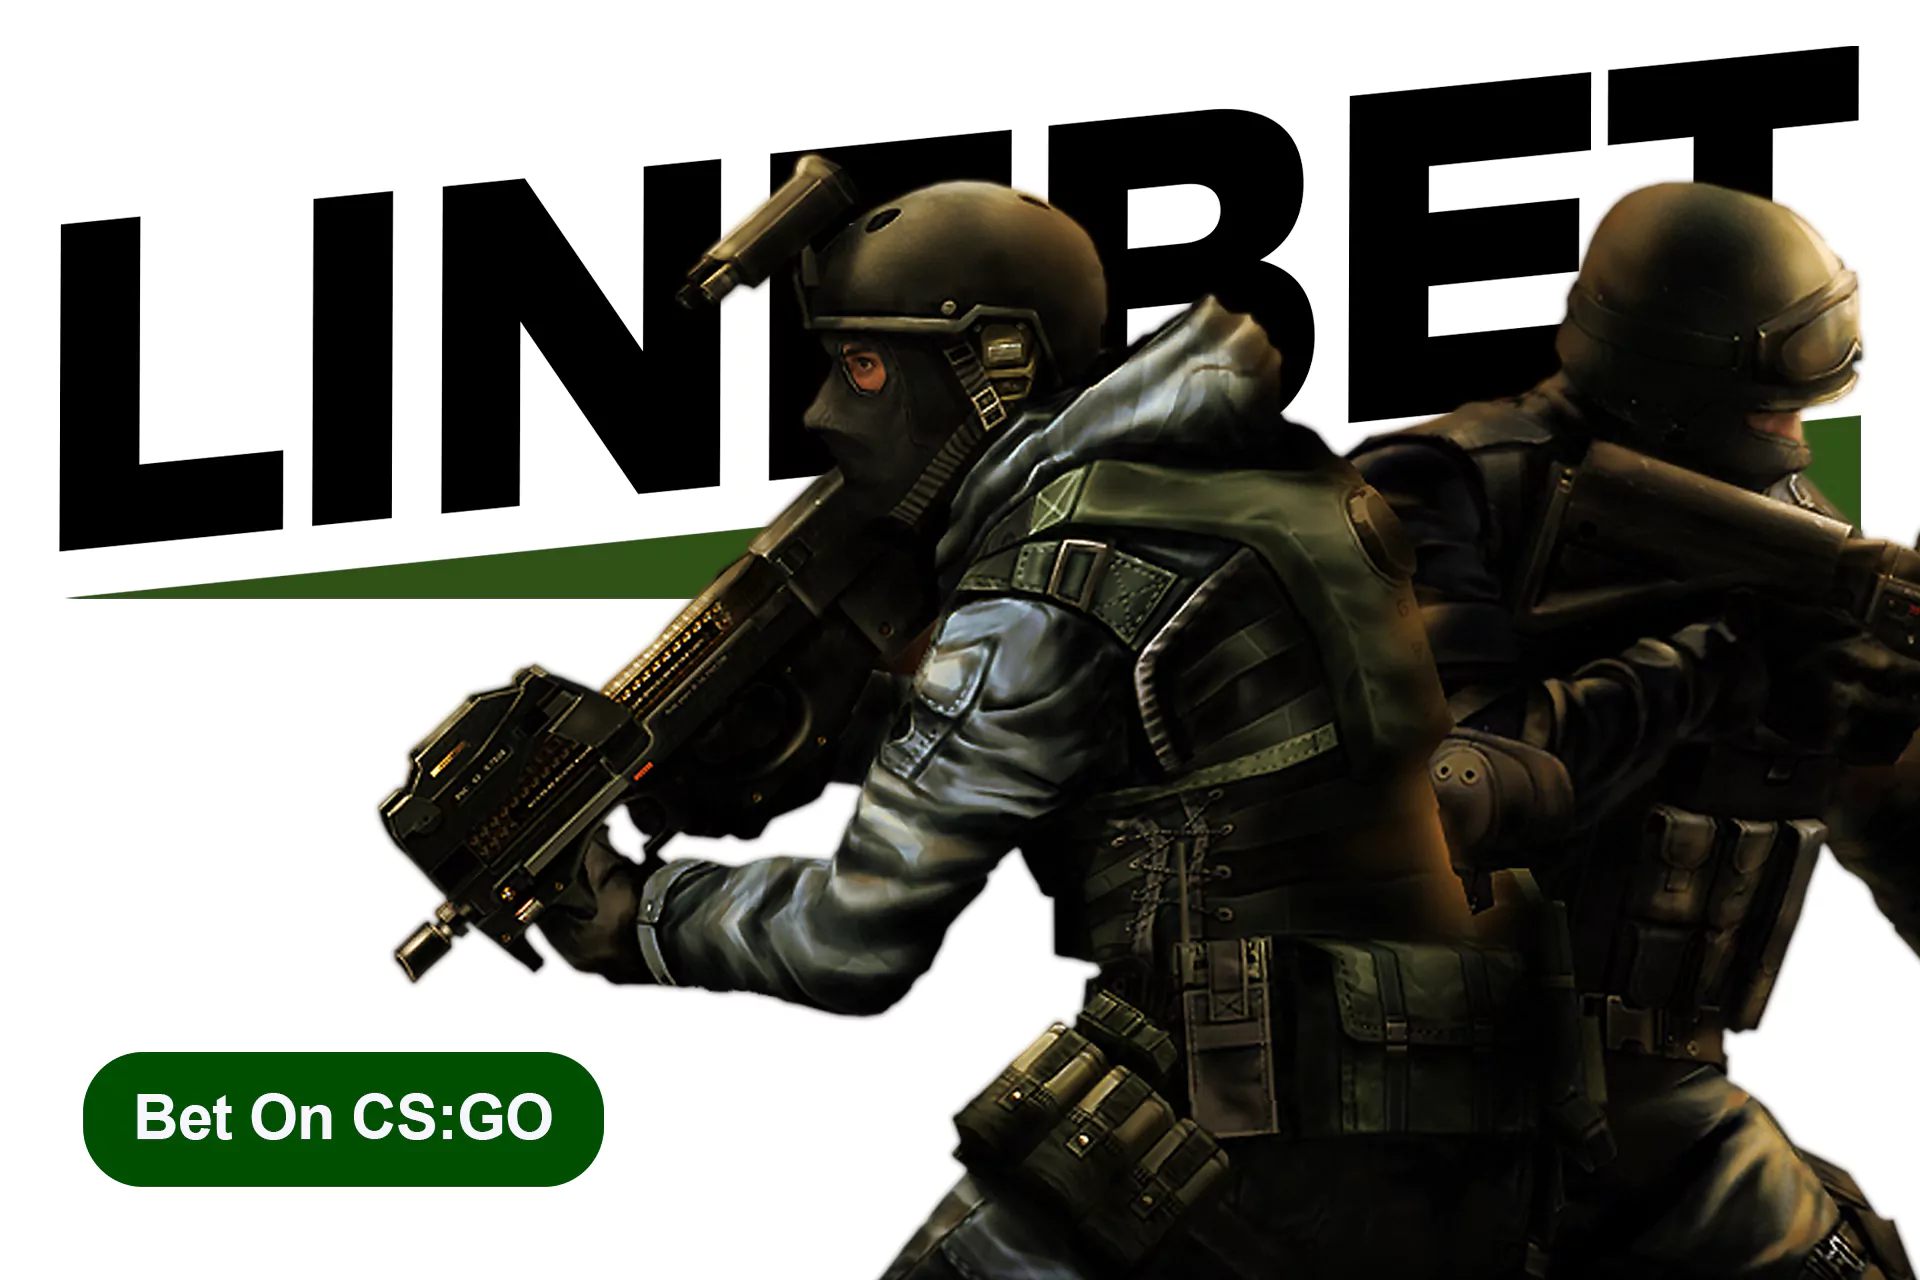 CS:GO fans place bets on matches at Linebet.